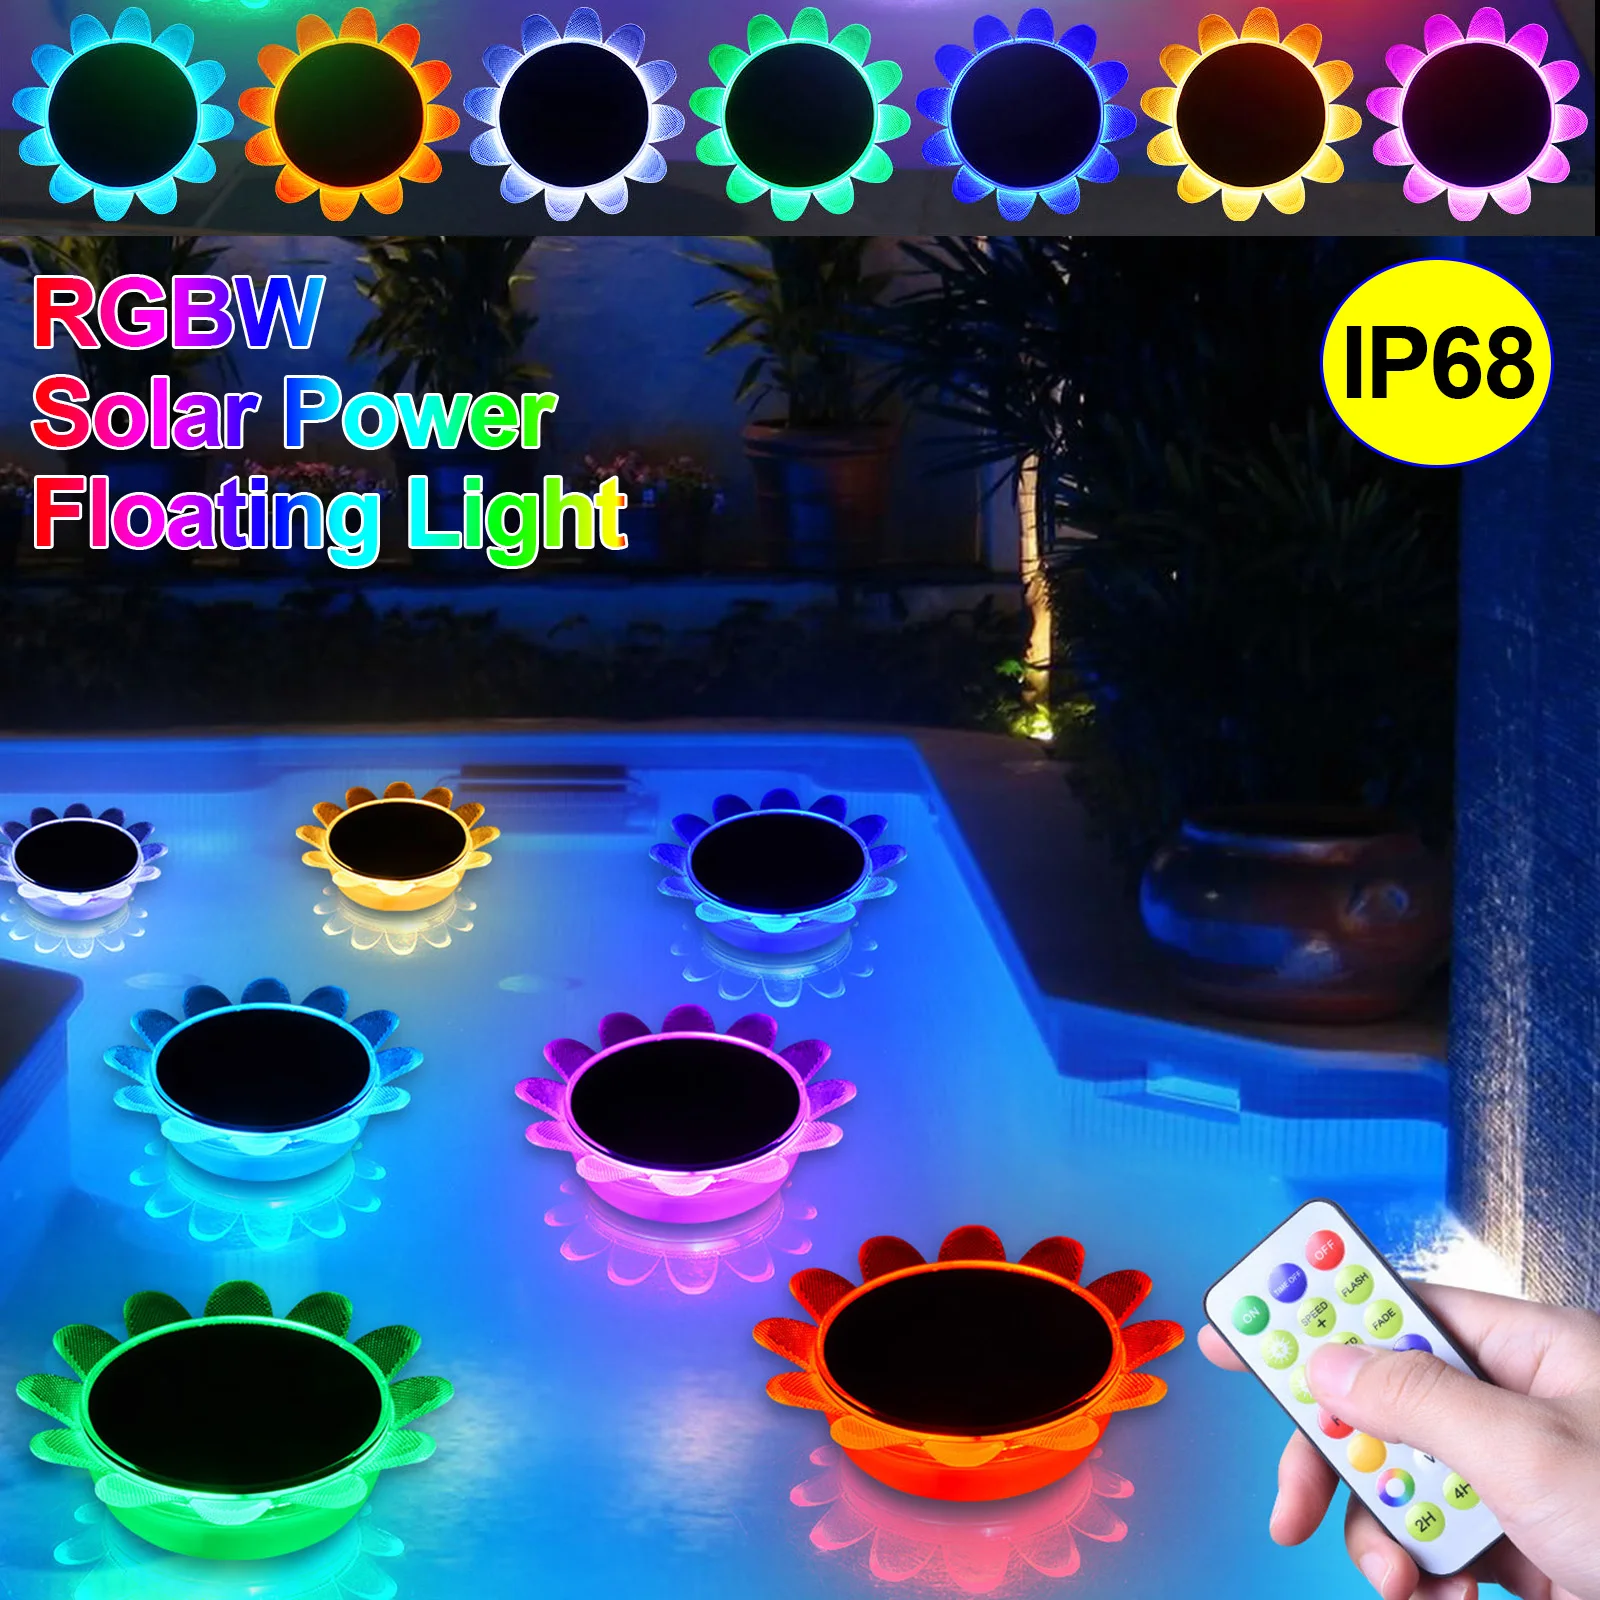 Floating Pool Lights 4 Modes Changing IP68 Waterproof LED Pond Lights IR Remote Control Solar Pool Lights Sunflower Pool Decor 3d glass aroma diffuser aromatherapy ultrasonic essential oil version air humidifier modes firework 200ml 7color changing lights